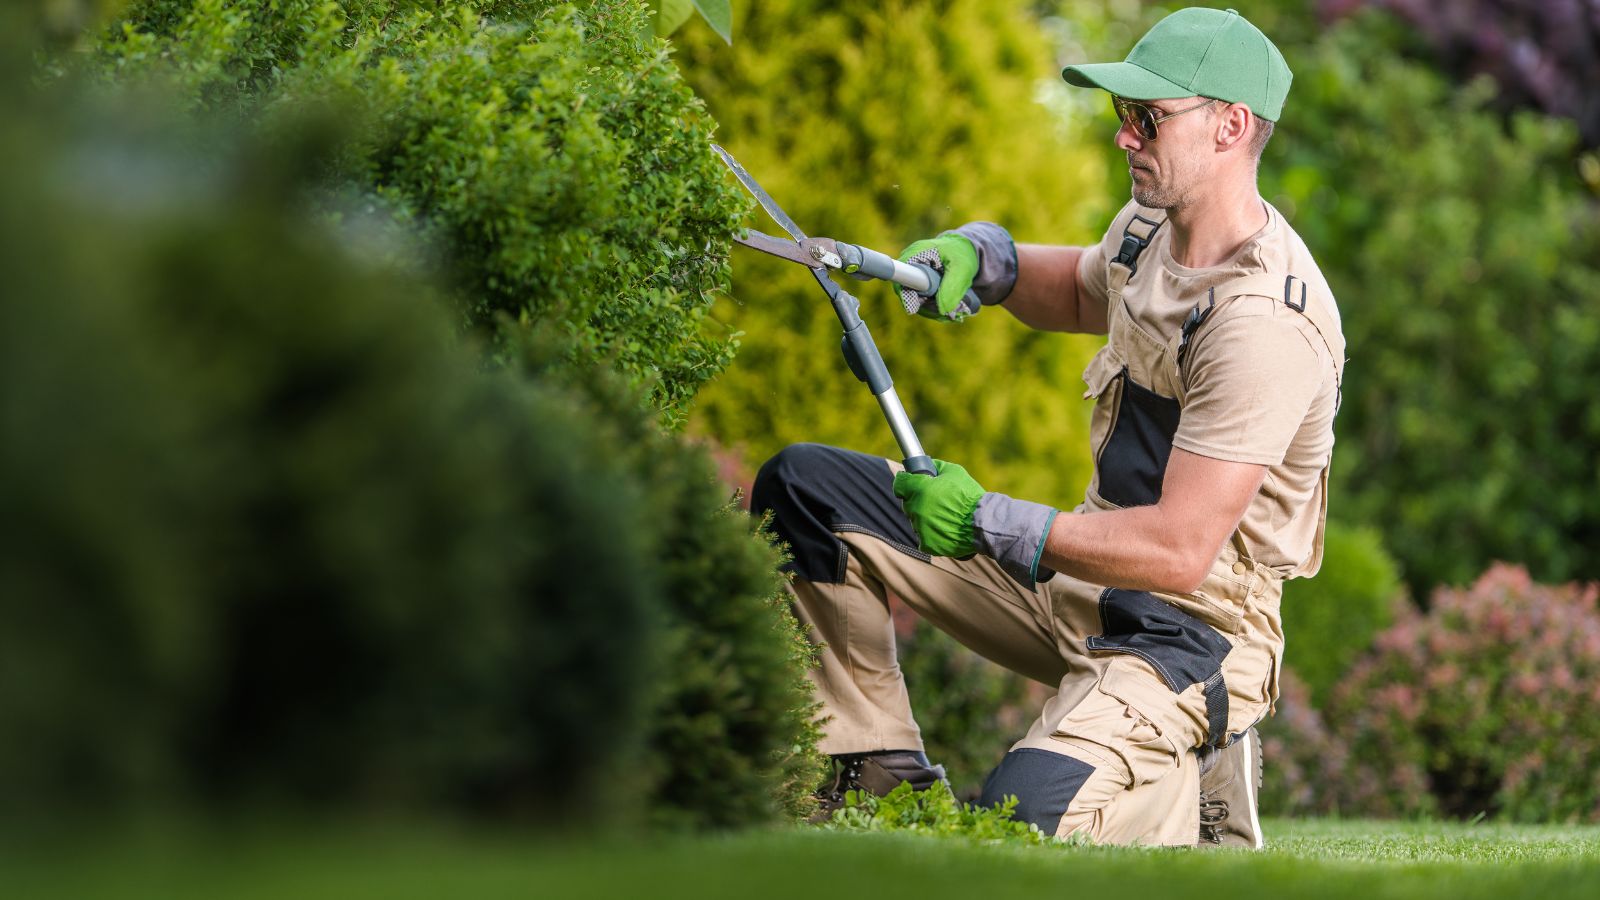 How often should landscape maintenance be performed - bighomeprojects.com